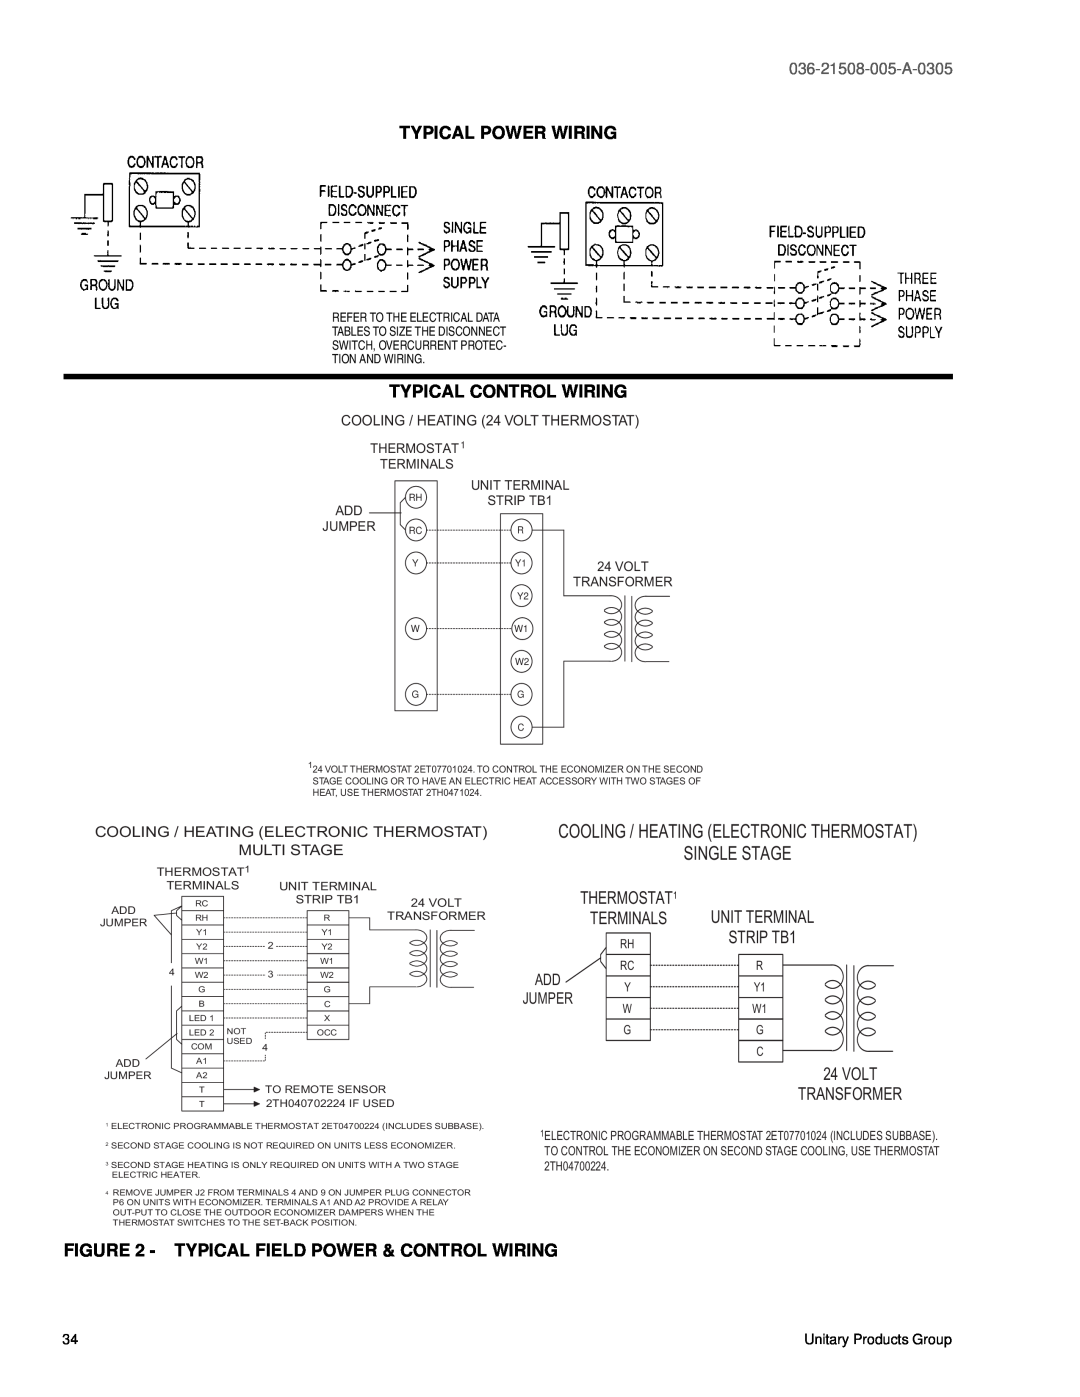 York BQ 036 Typical Power Wiring, Typical Control Wiring, Typical Field Power & Control Wiring, Single Stage, Multi Stage 